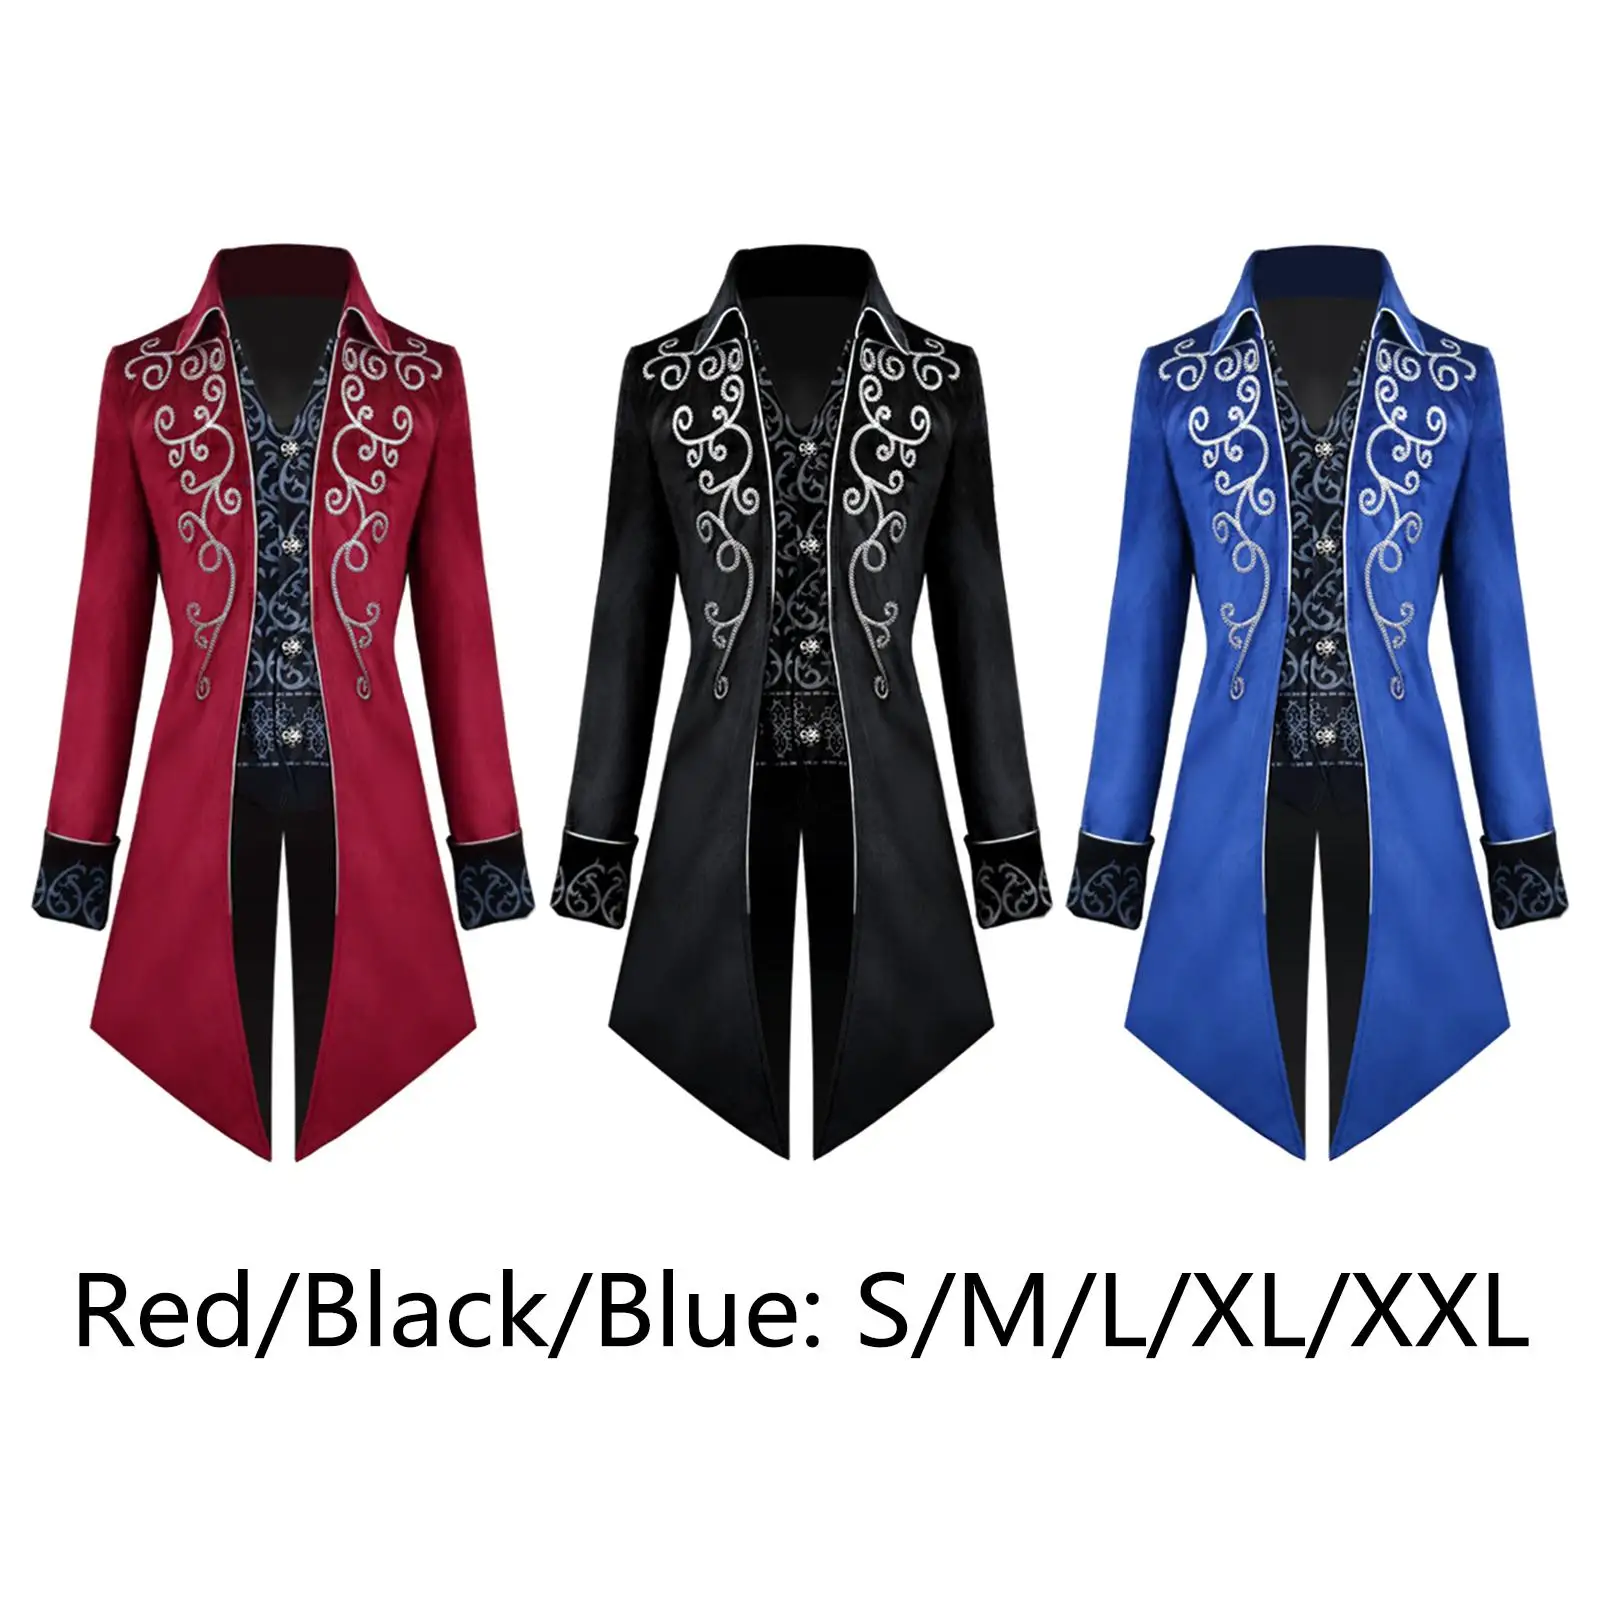 Male Lady Medieval Gothic Tailcoat  Steampunk Lapel Long Coat Trench Coat Jacket for Viking Cosplay Party Halloween Stage